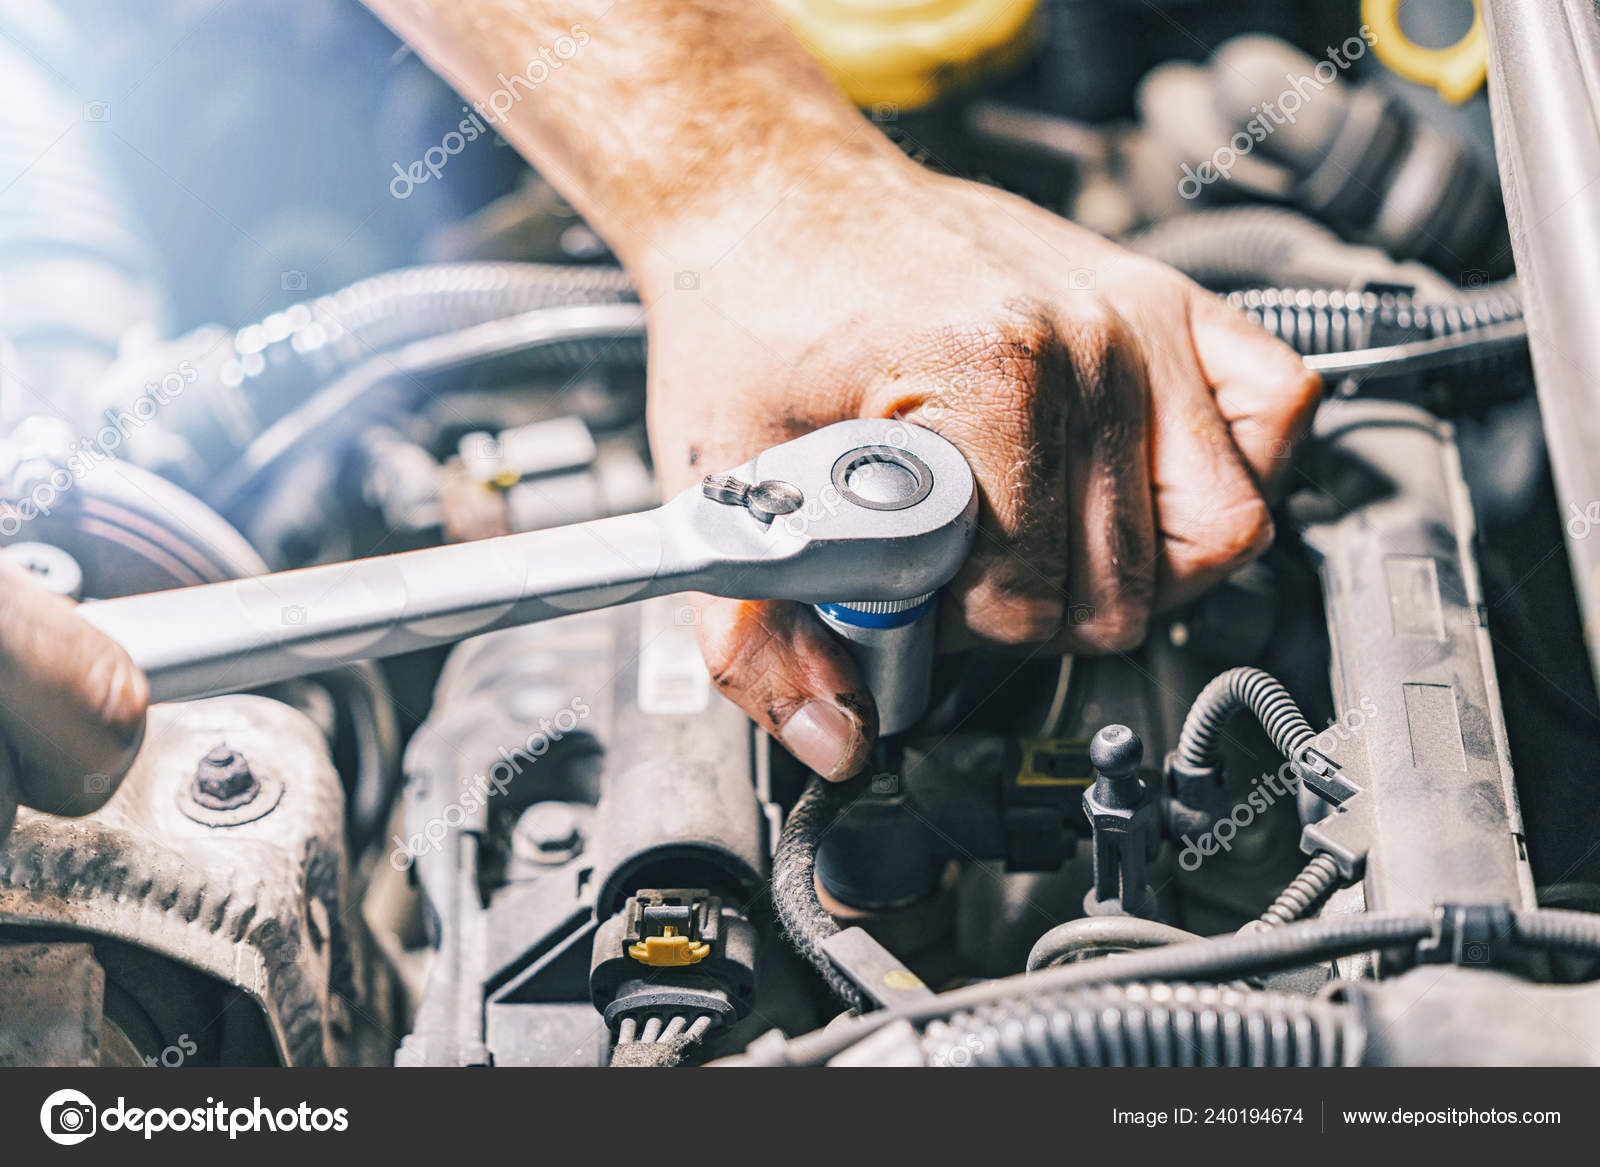 Hands of male car mechanic selecting wrench from tool box in repair garage  stock photo